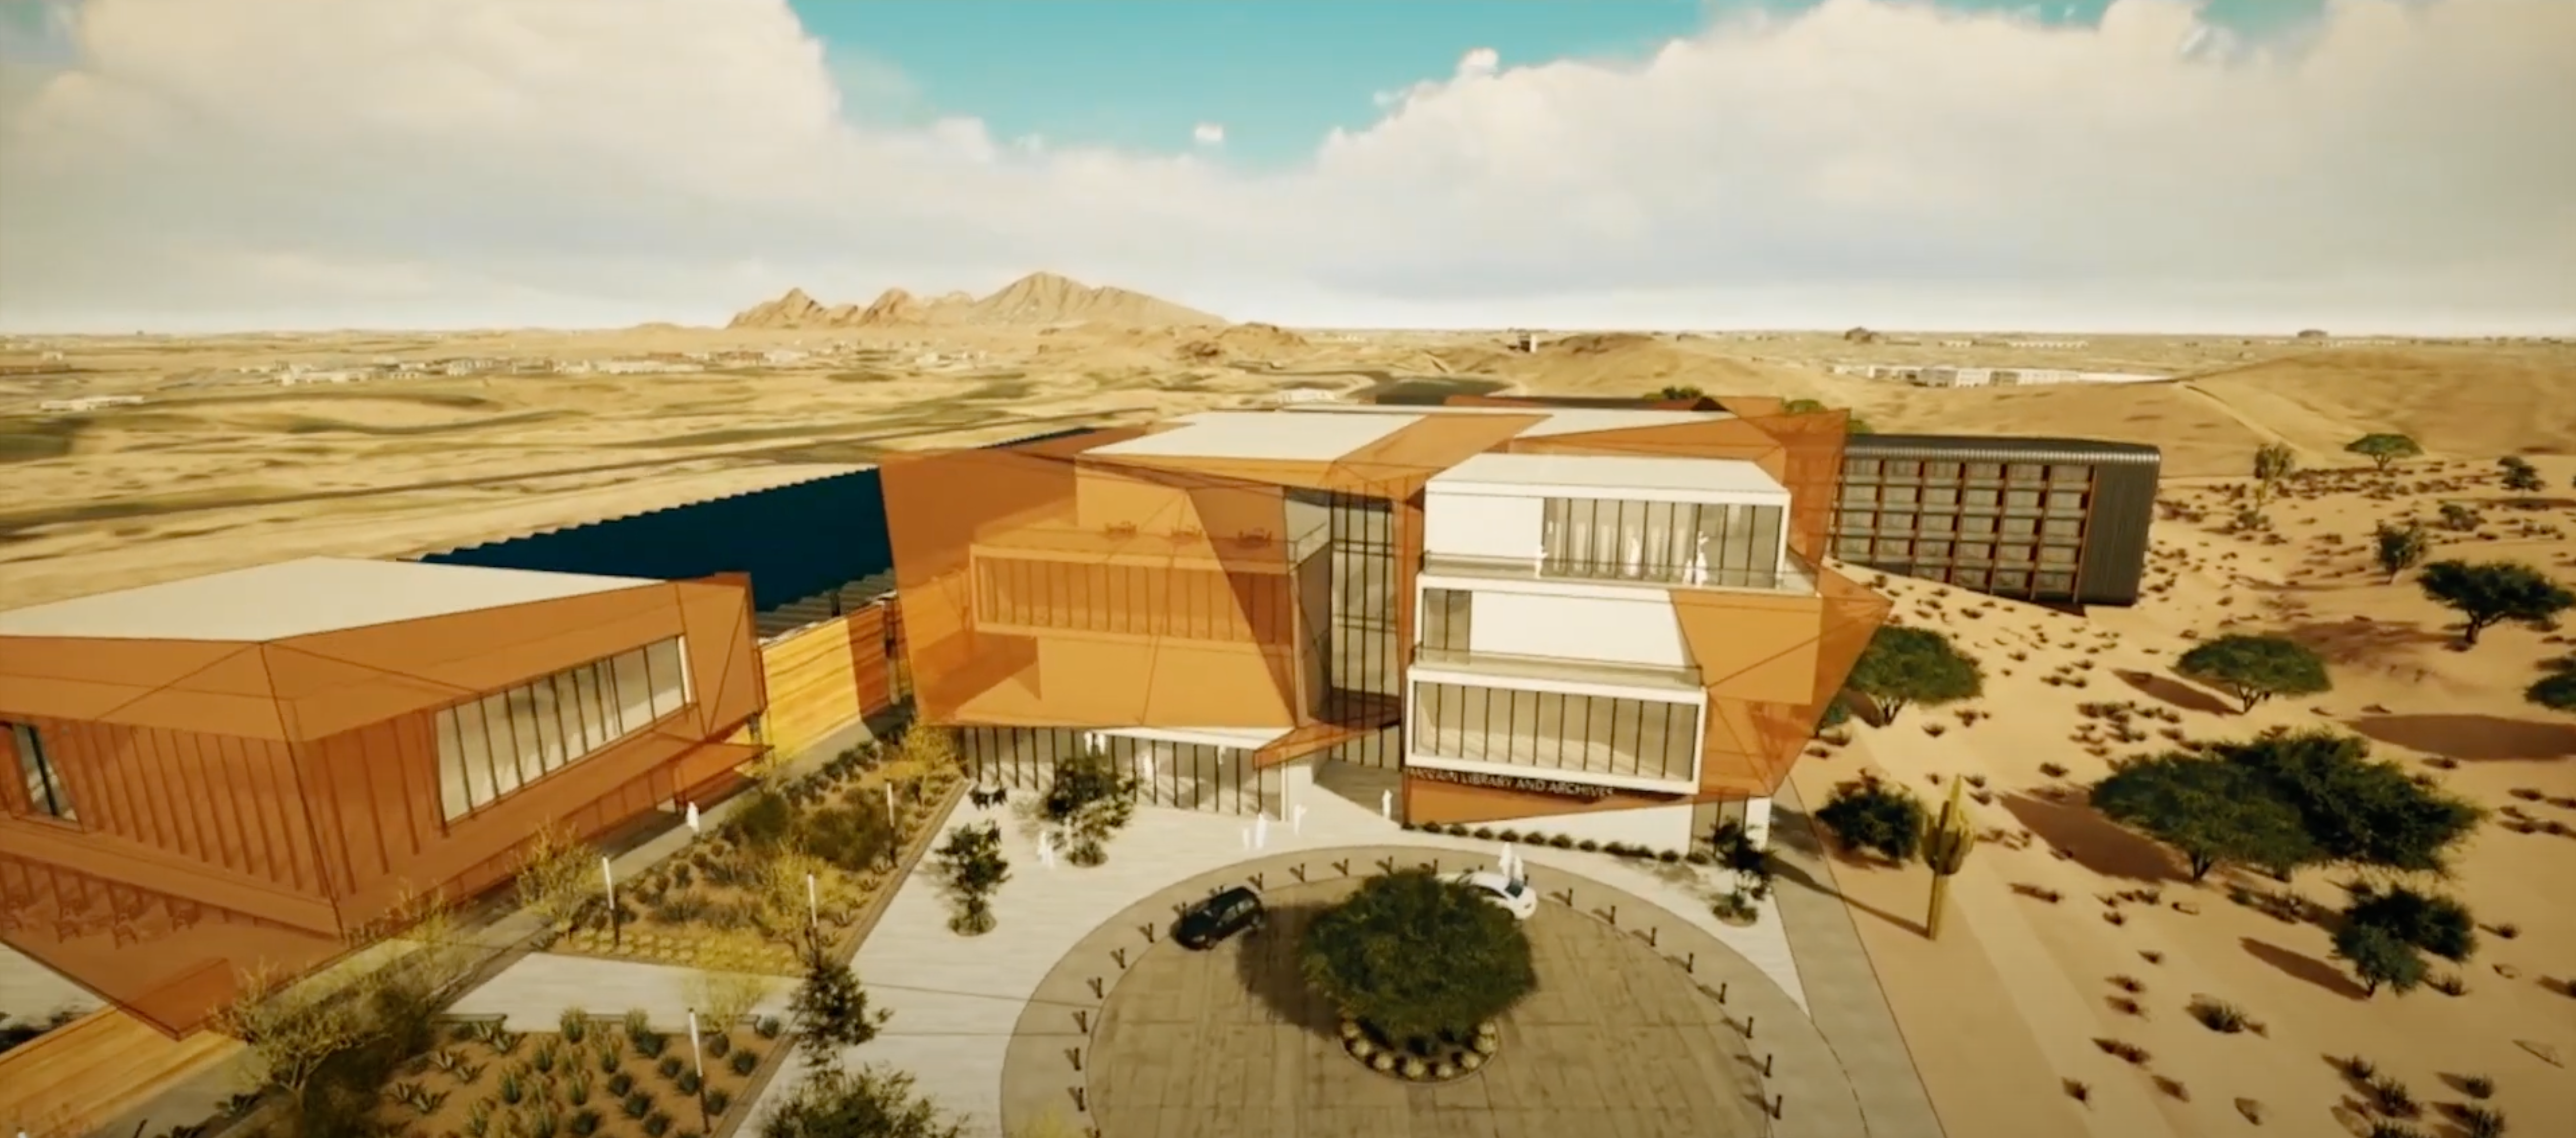 Rendering of an aerial view of The McCain National Library 